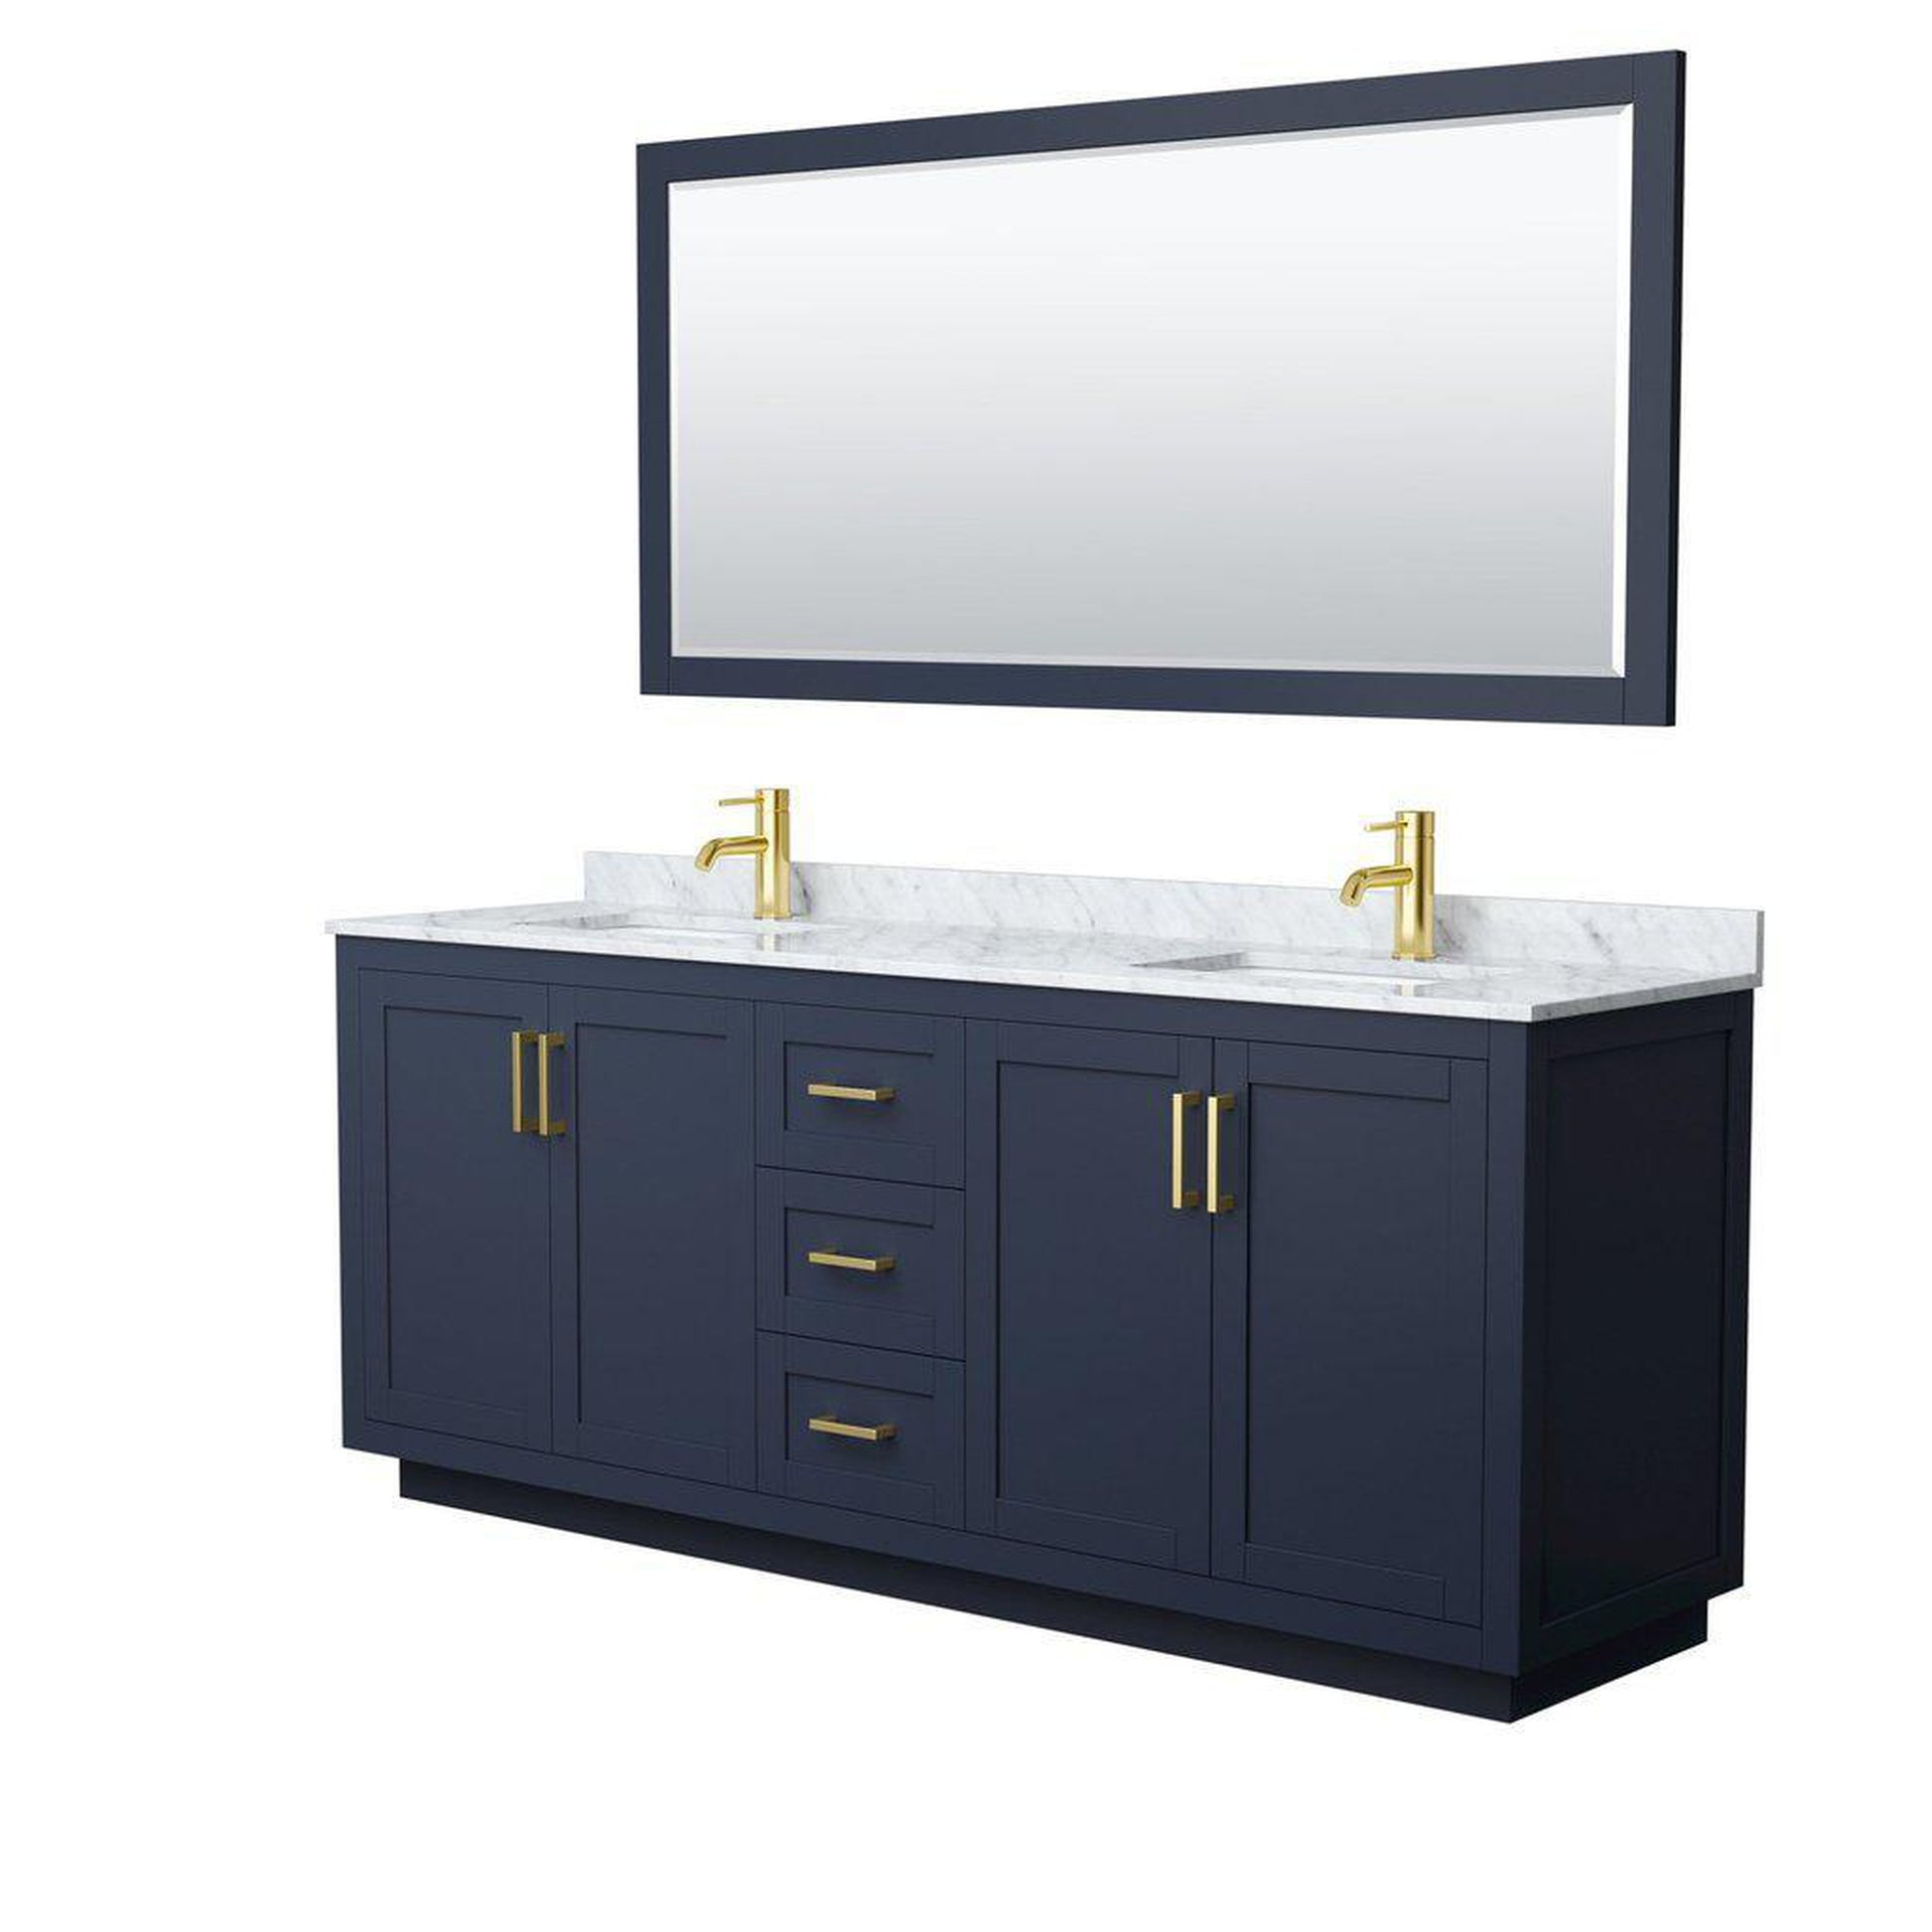 Wyndham Collection Miranda 80" Double Bathroom Dark Blue Vanity Set With White Carrara Marble Countertop, Undermount Square Sink, 70" Mirror And Brushed Gold Trim